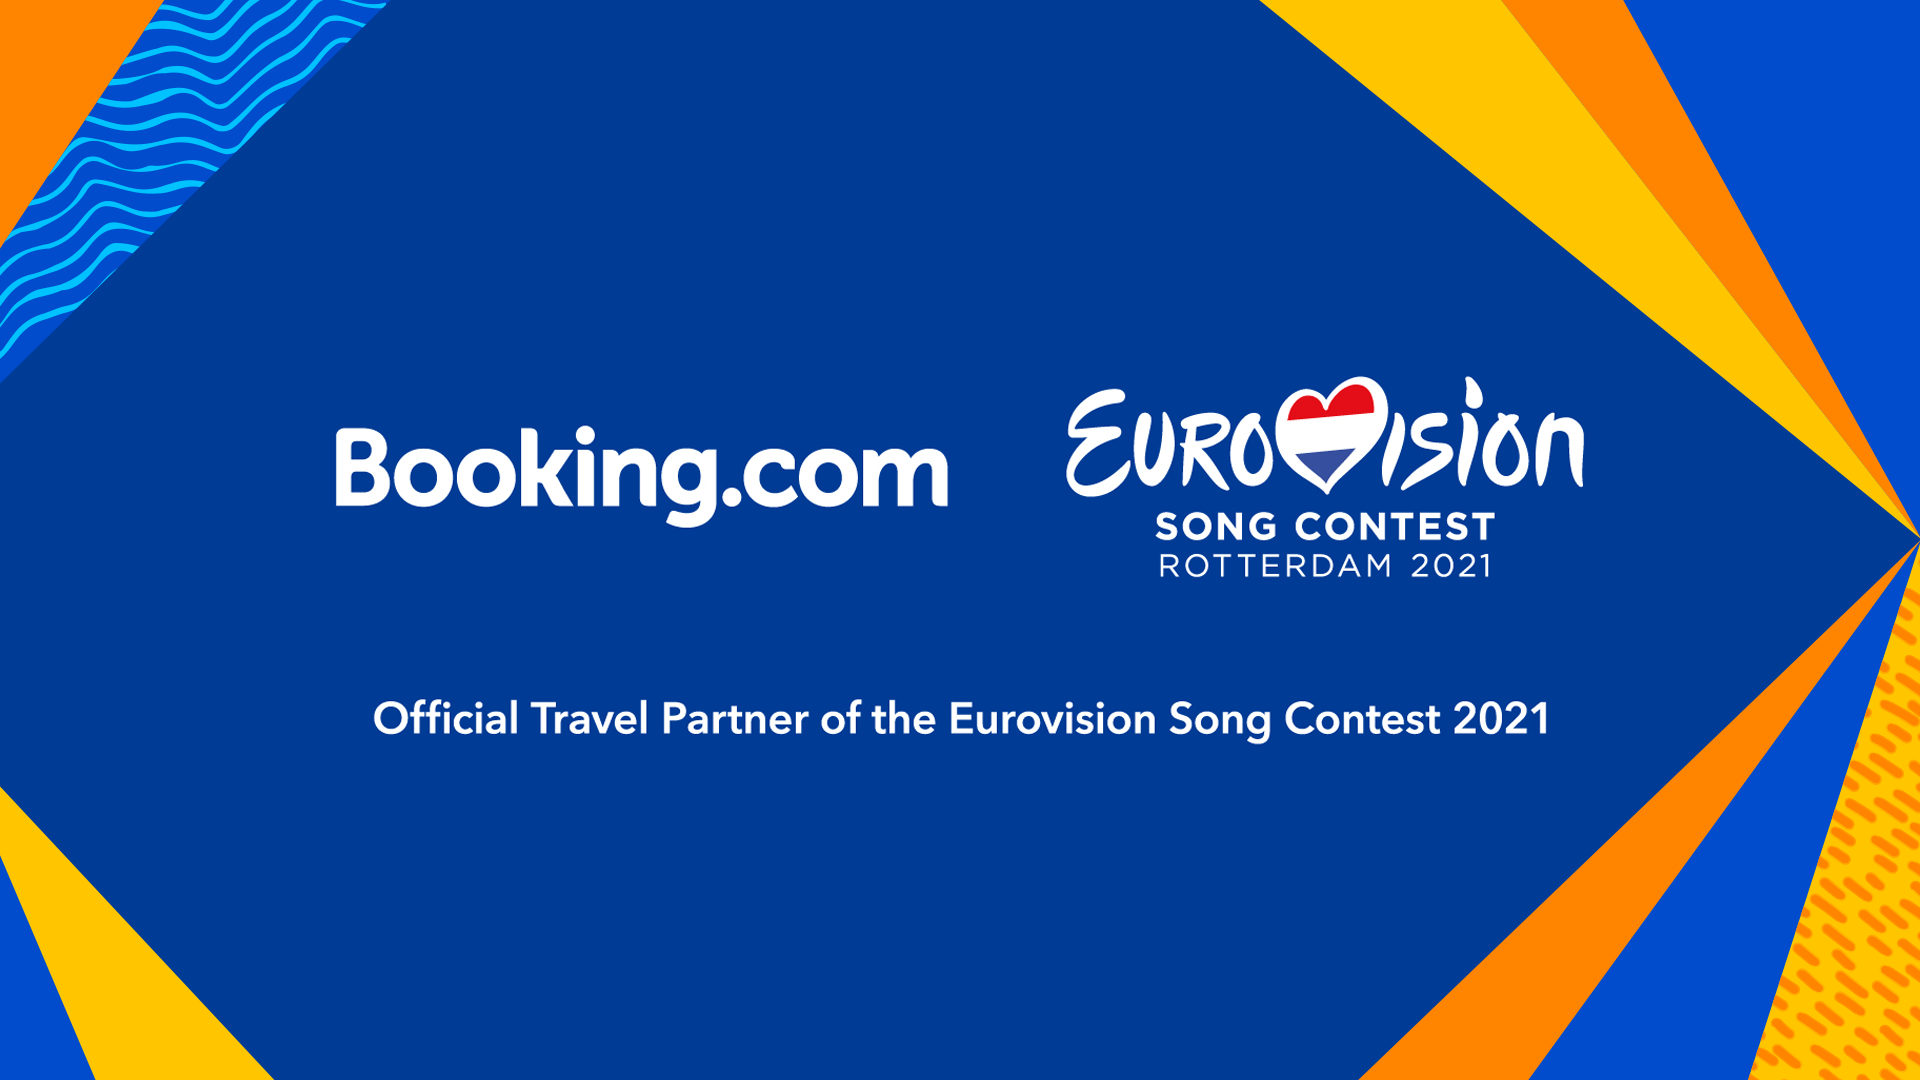 Booking.com Becomes the Official Travel Partner of the Eurovision Song Contest 2021